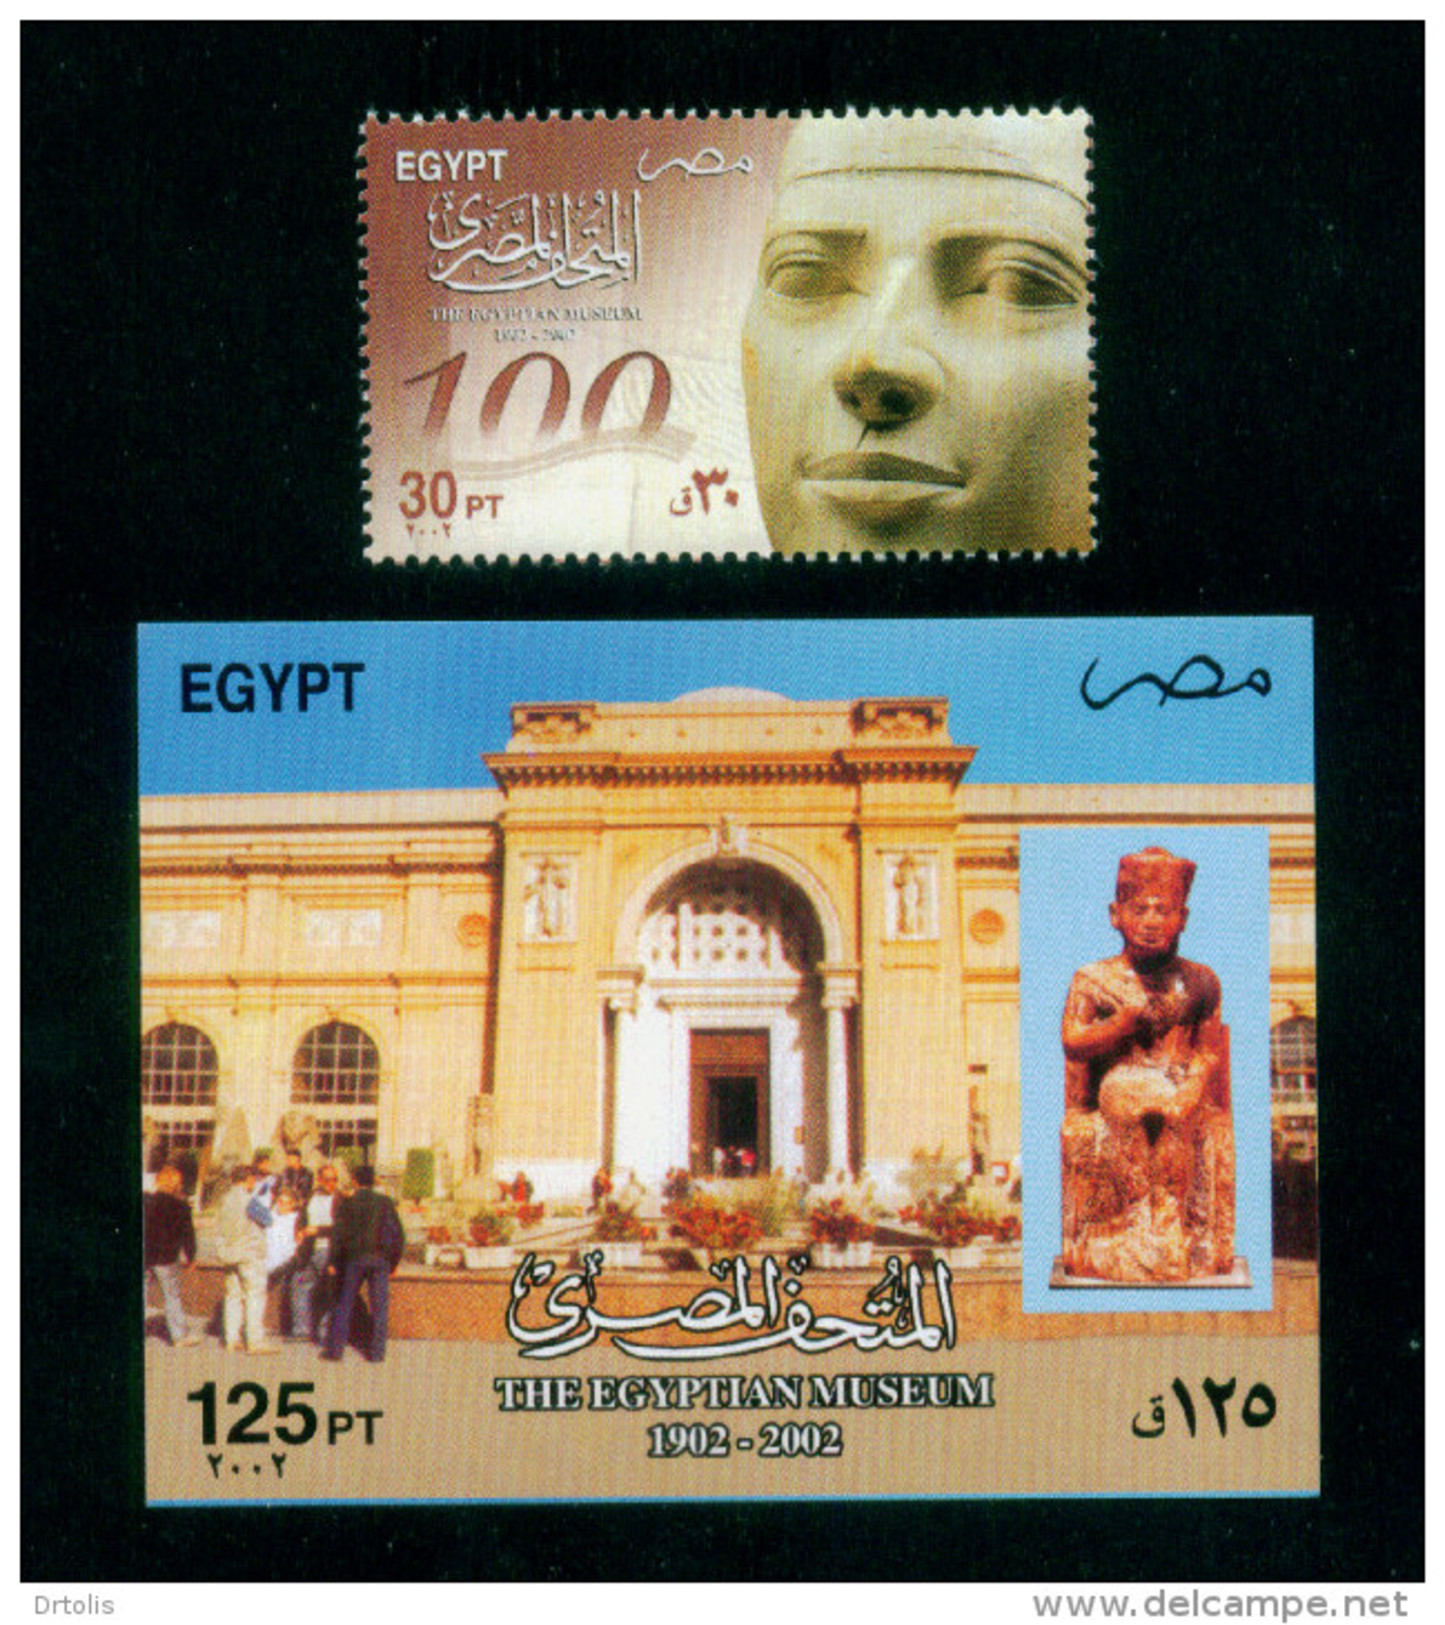 EGYPT / 2002 /  THE EGYPTIAN MUSEUM / EGYPTOLOGY / CHEOPS / SCULPTURE / MNH / VF - Unused Stamps